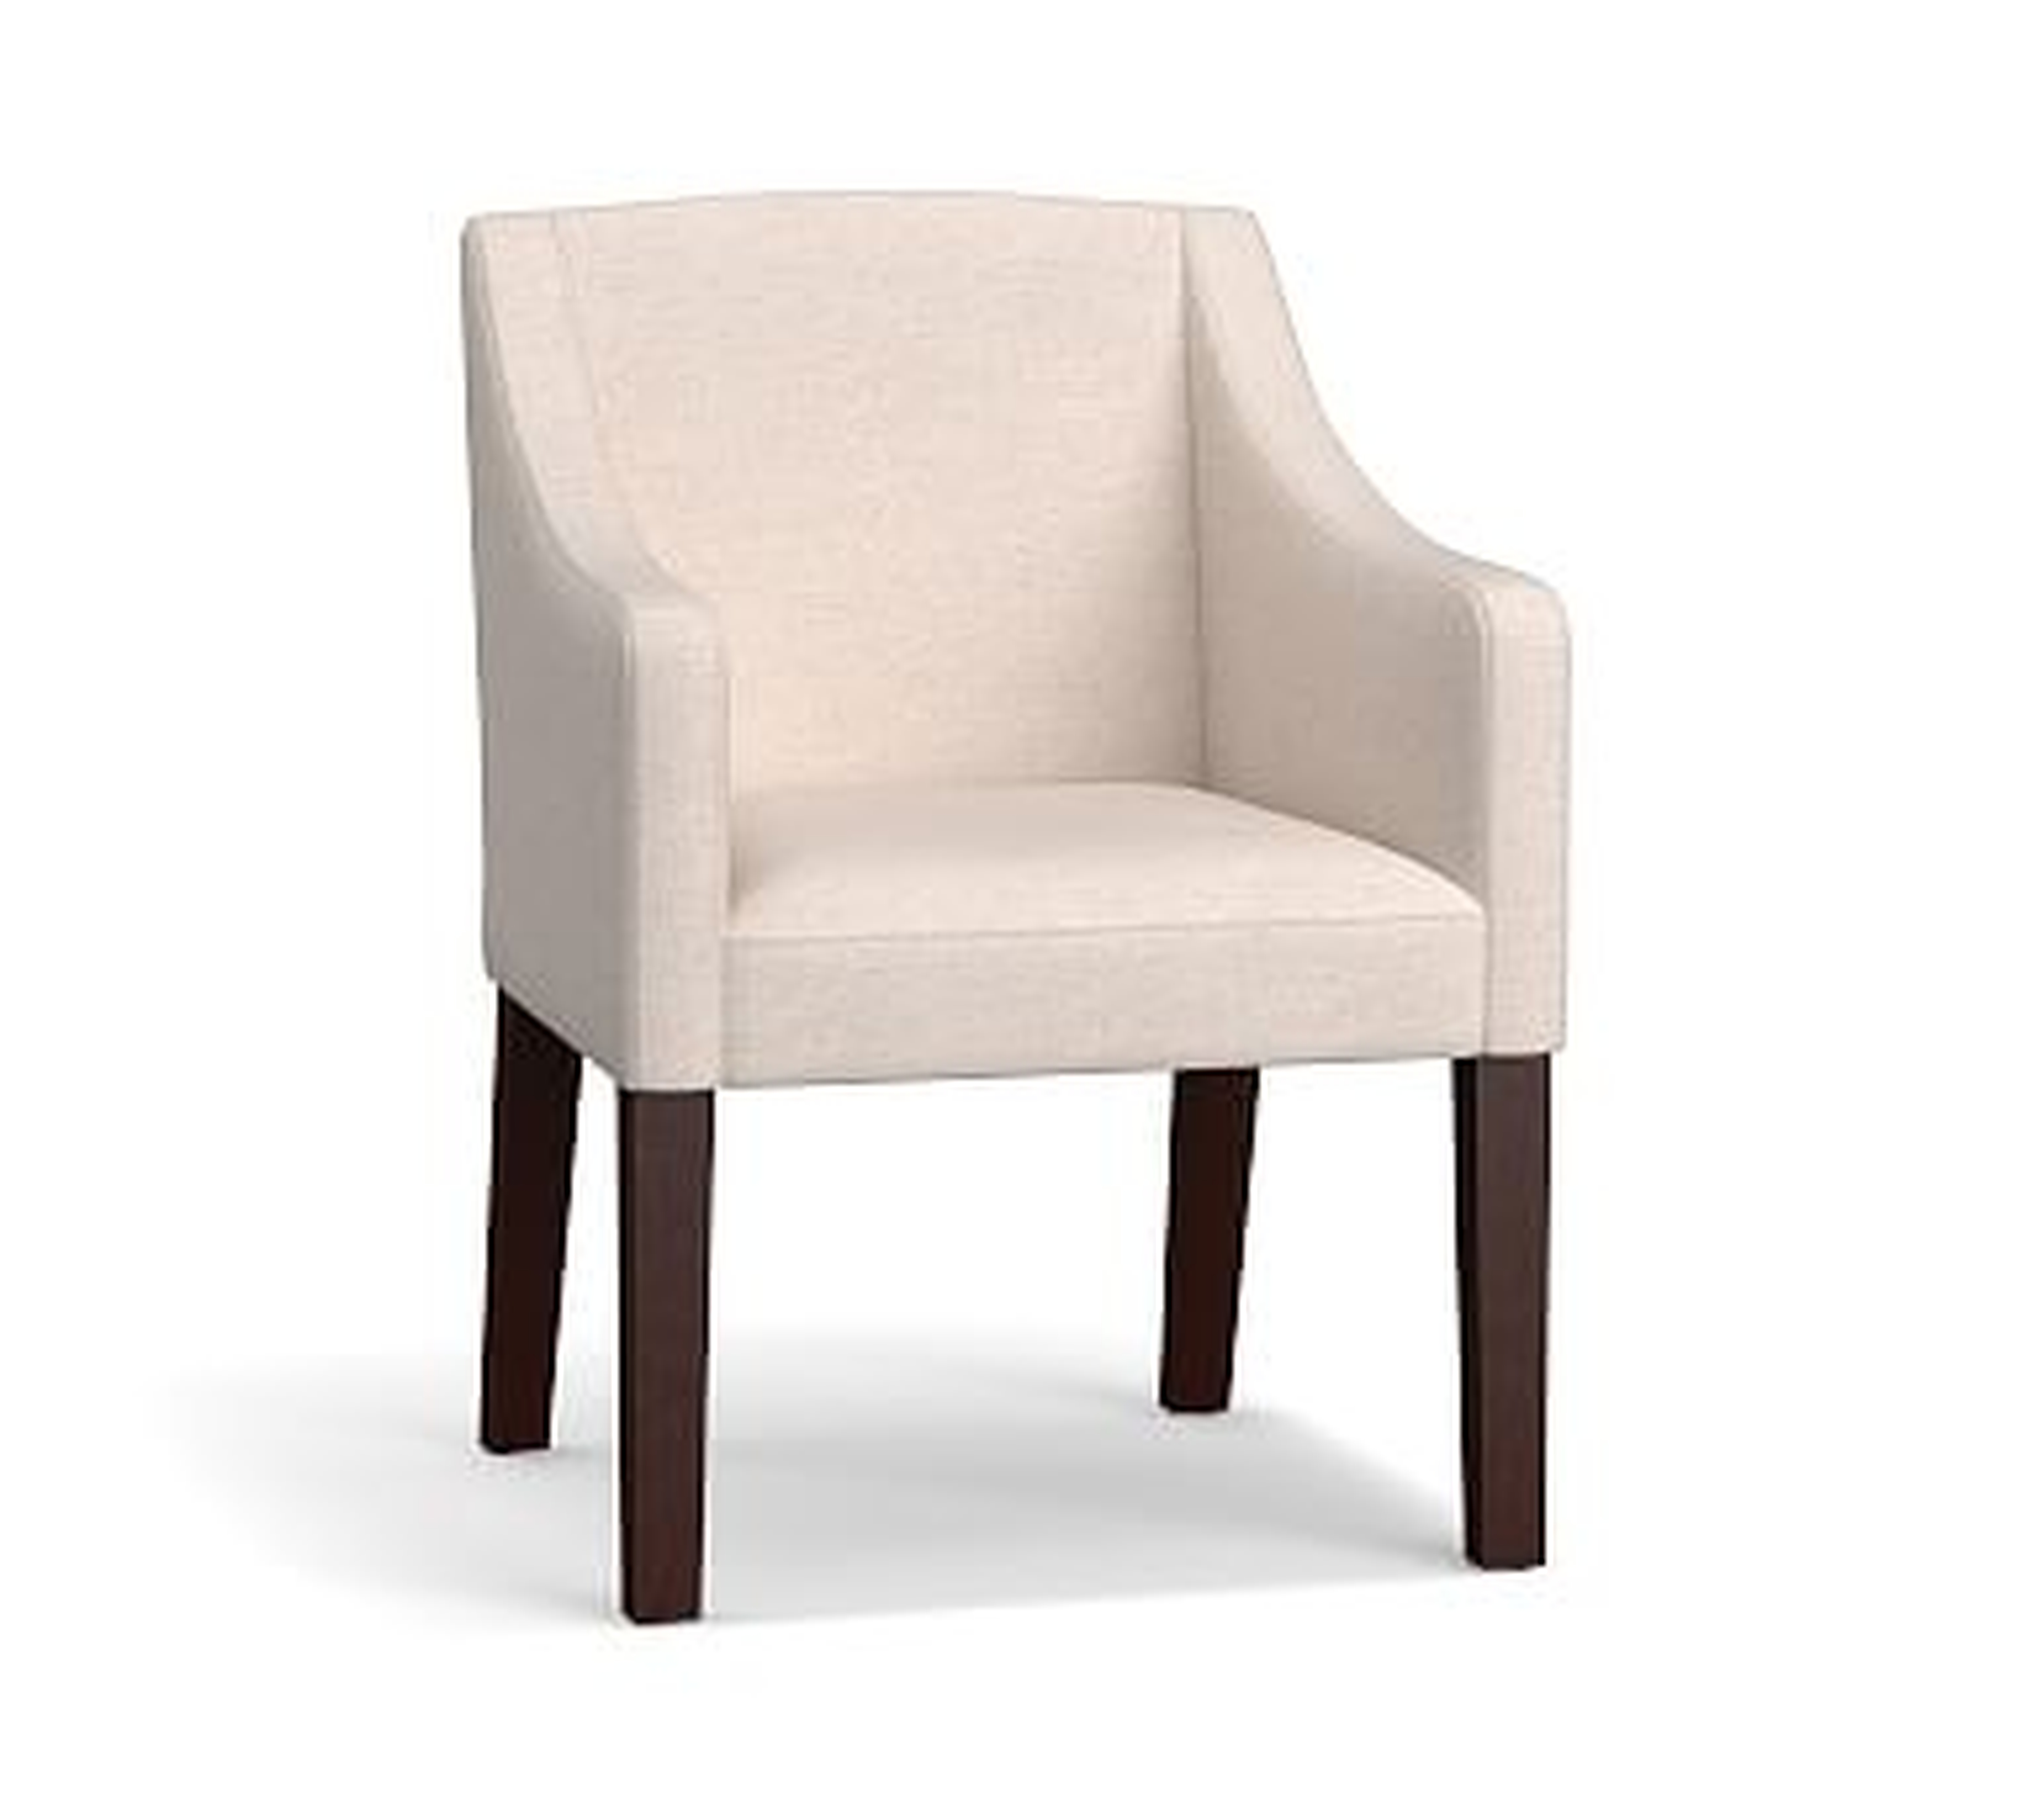 Classic Upholstered Slope Armchair with Espresso Legs, Basketweave Slub Oatmeal - Pottery Barn